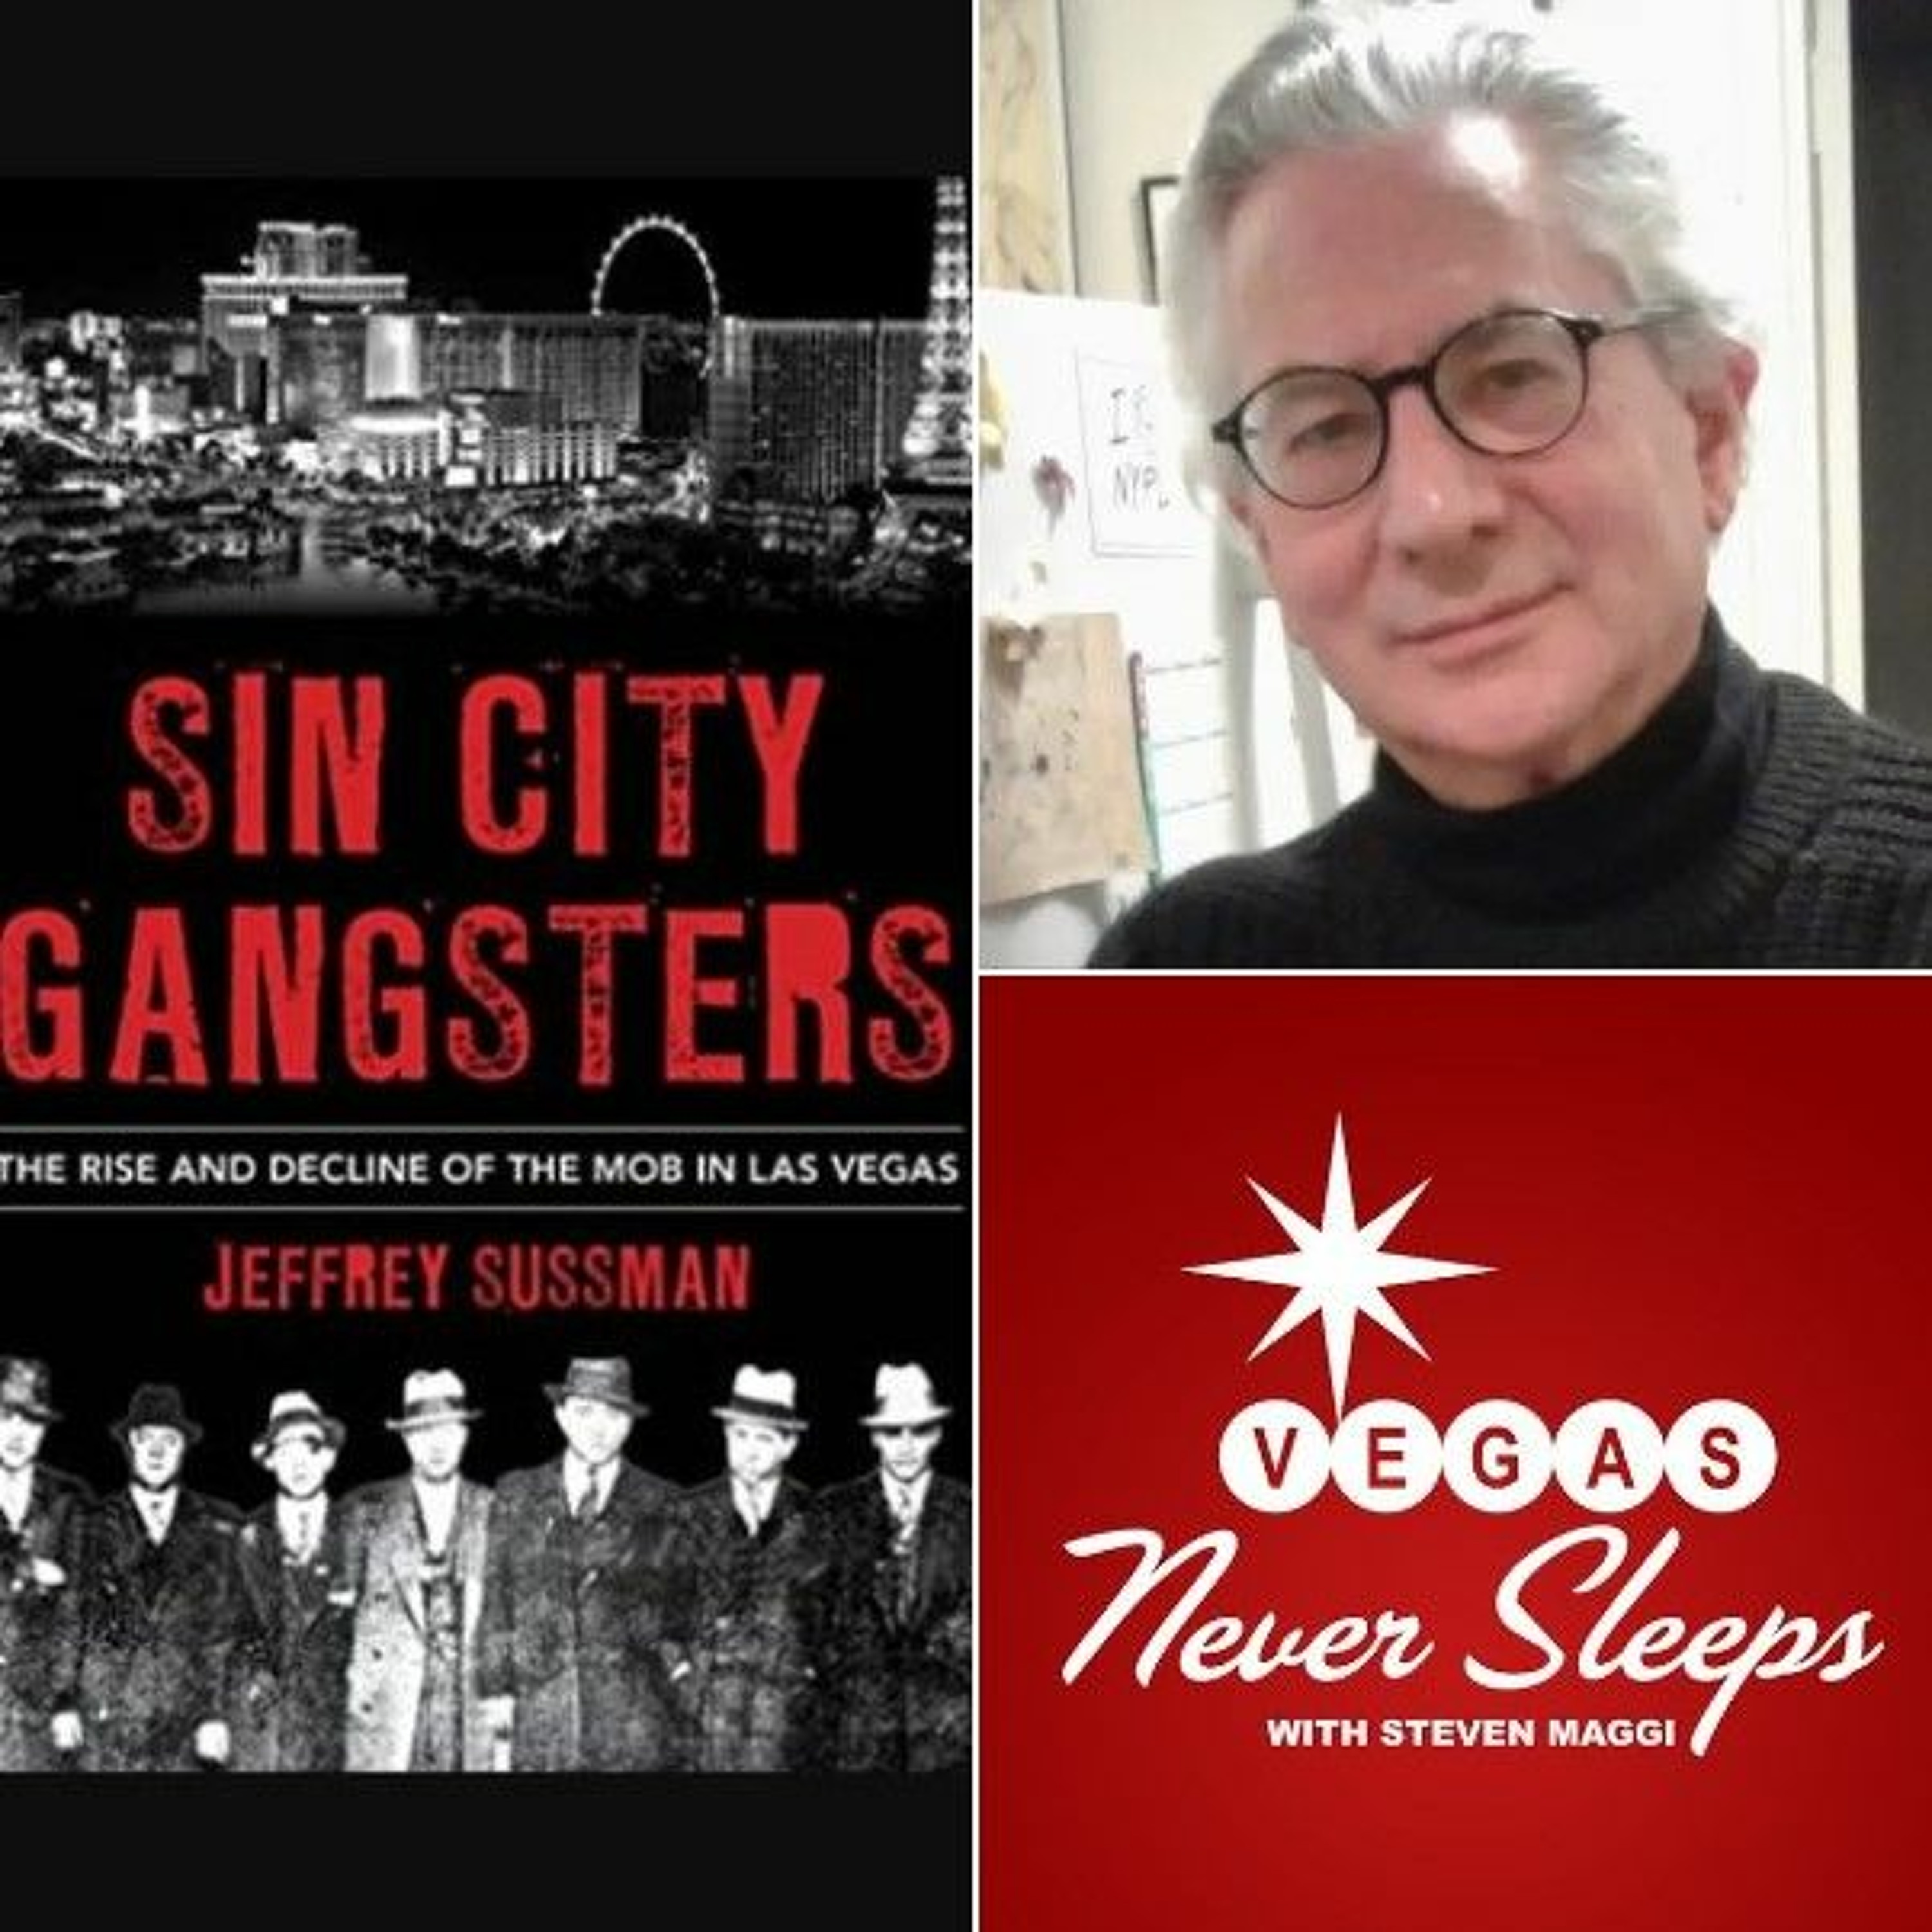 ”Sin City Gangsters” - The Complete Jeffrey Sussman Interview